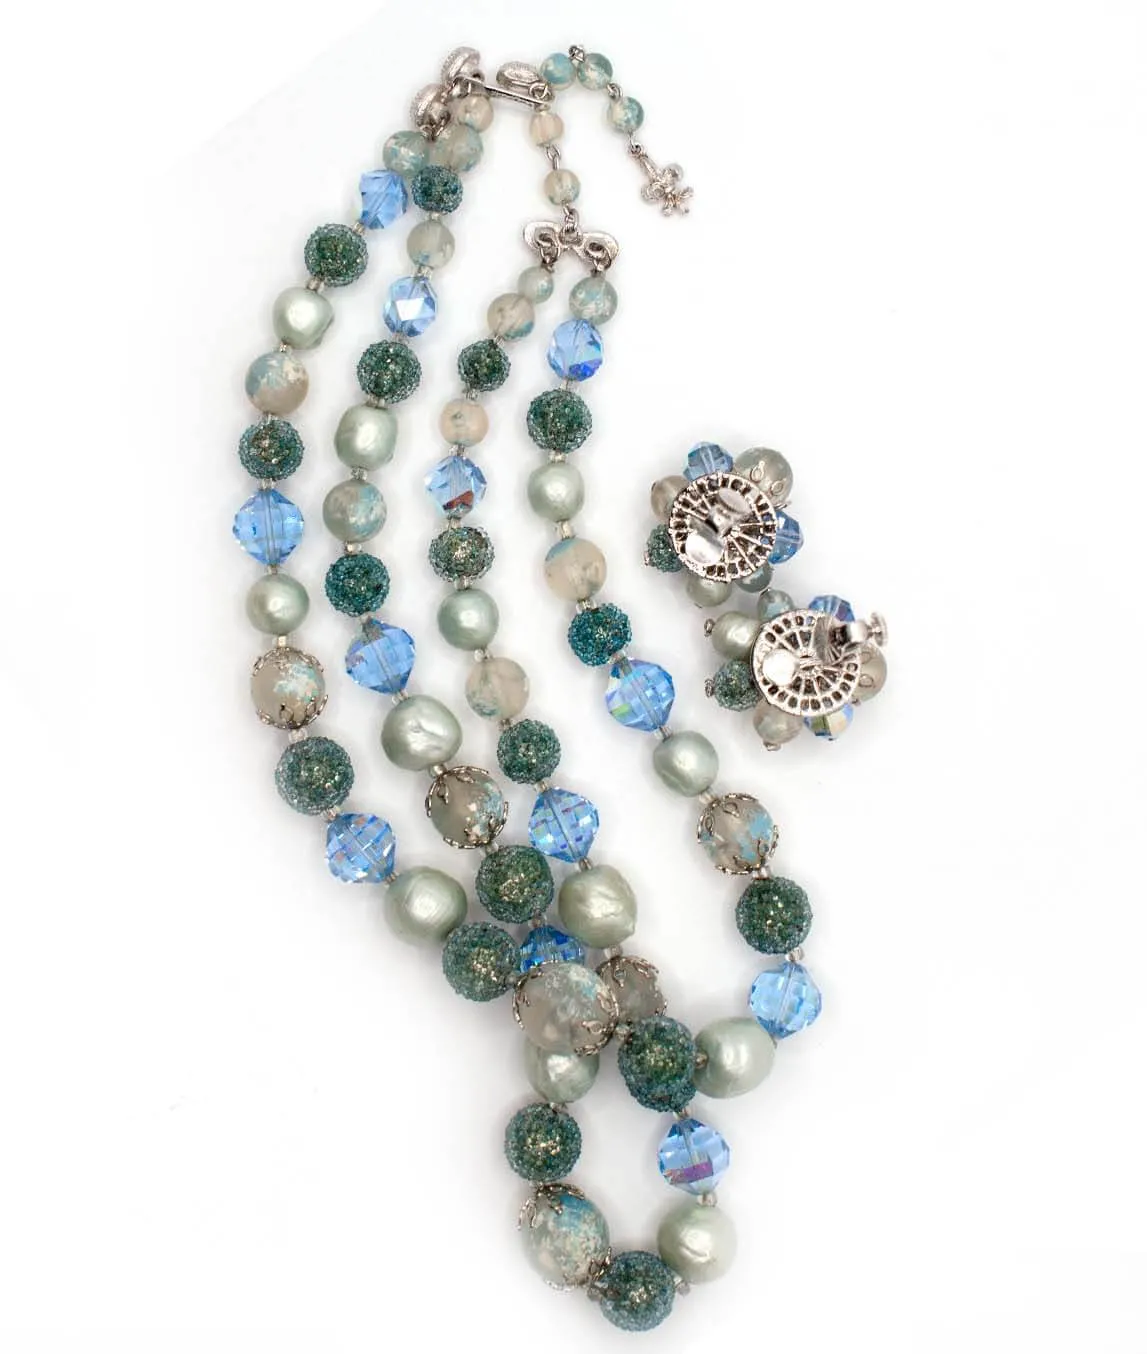 Vendôme Necklace and Earrings blue green and white beads earring backings in silver tone metal